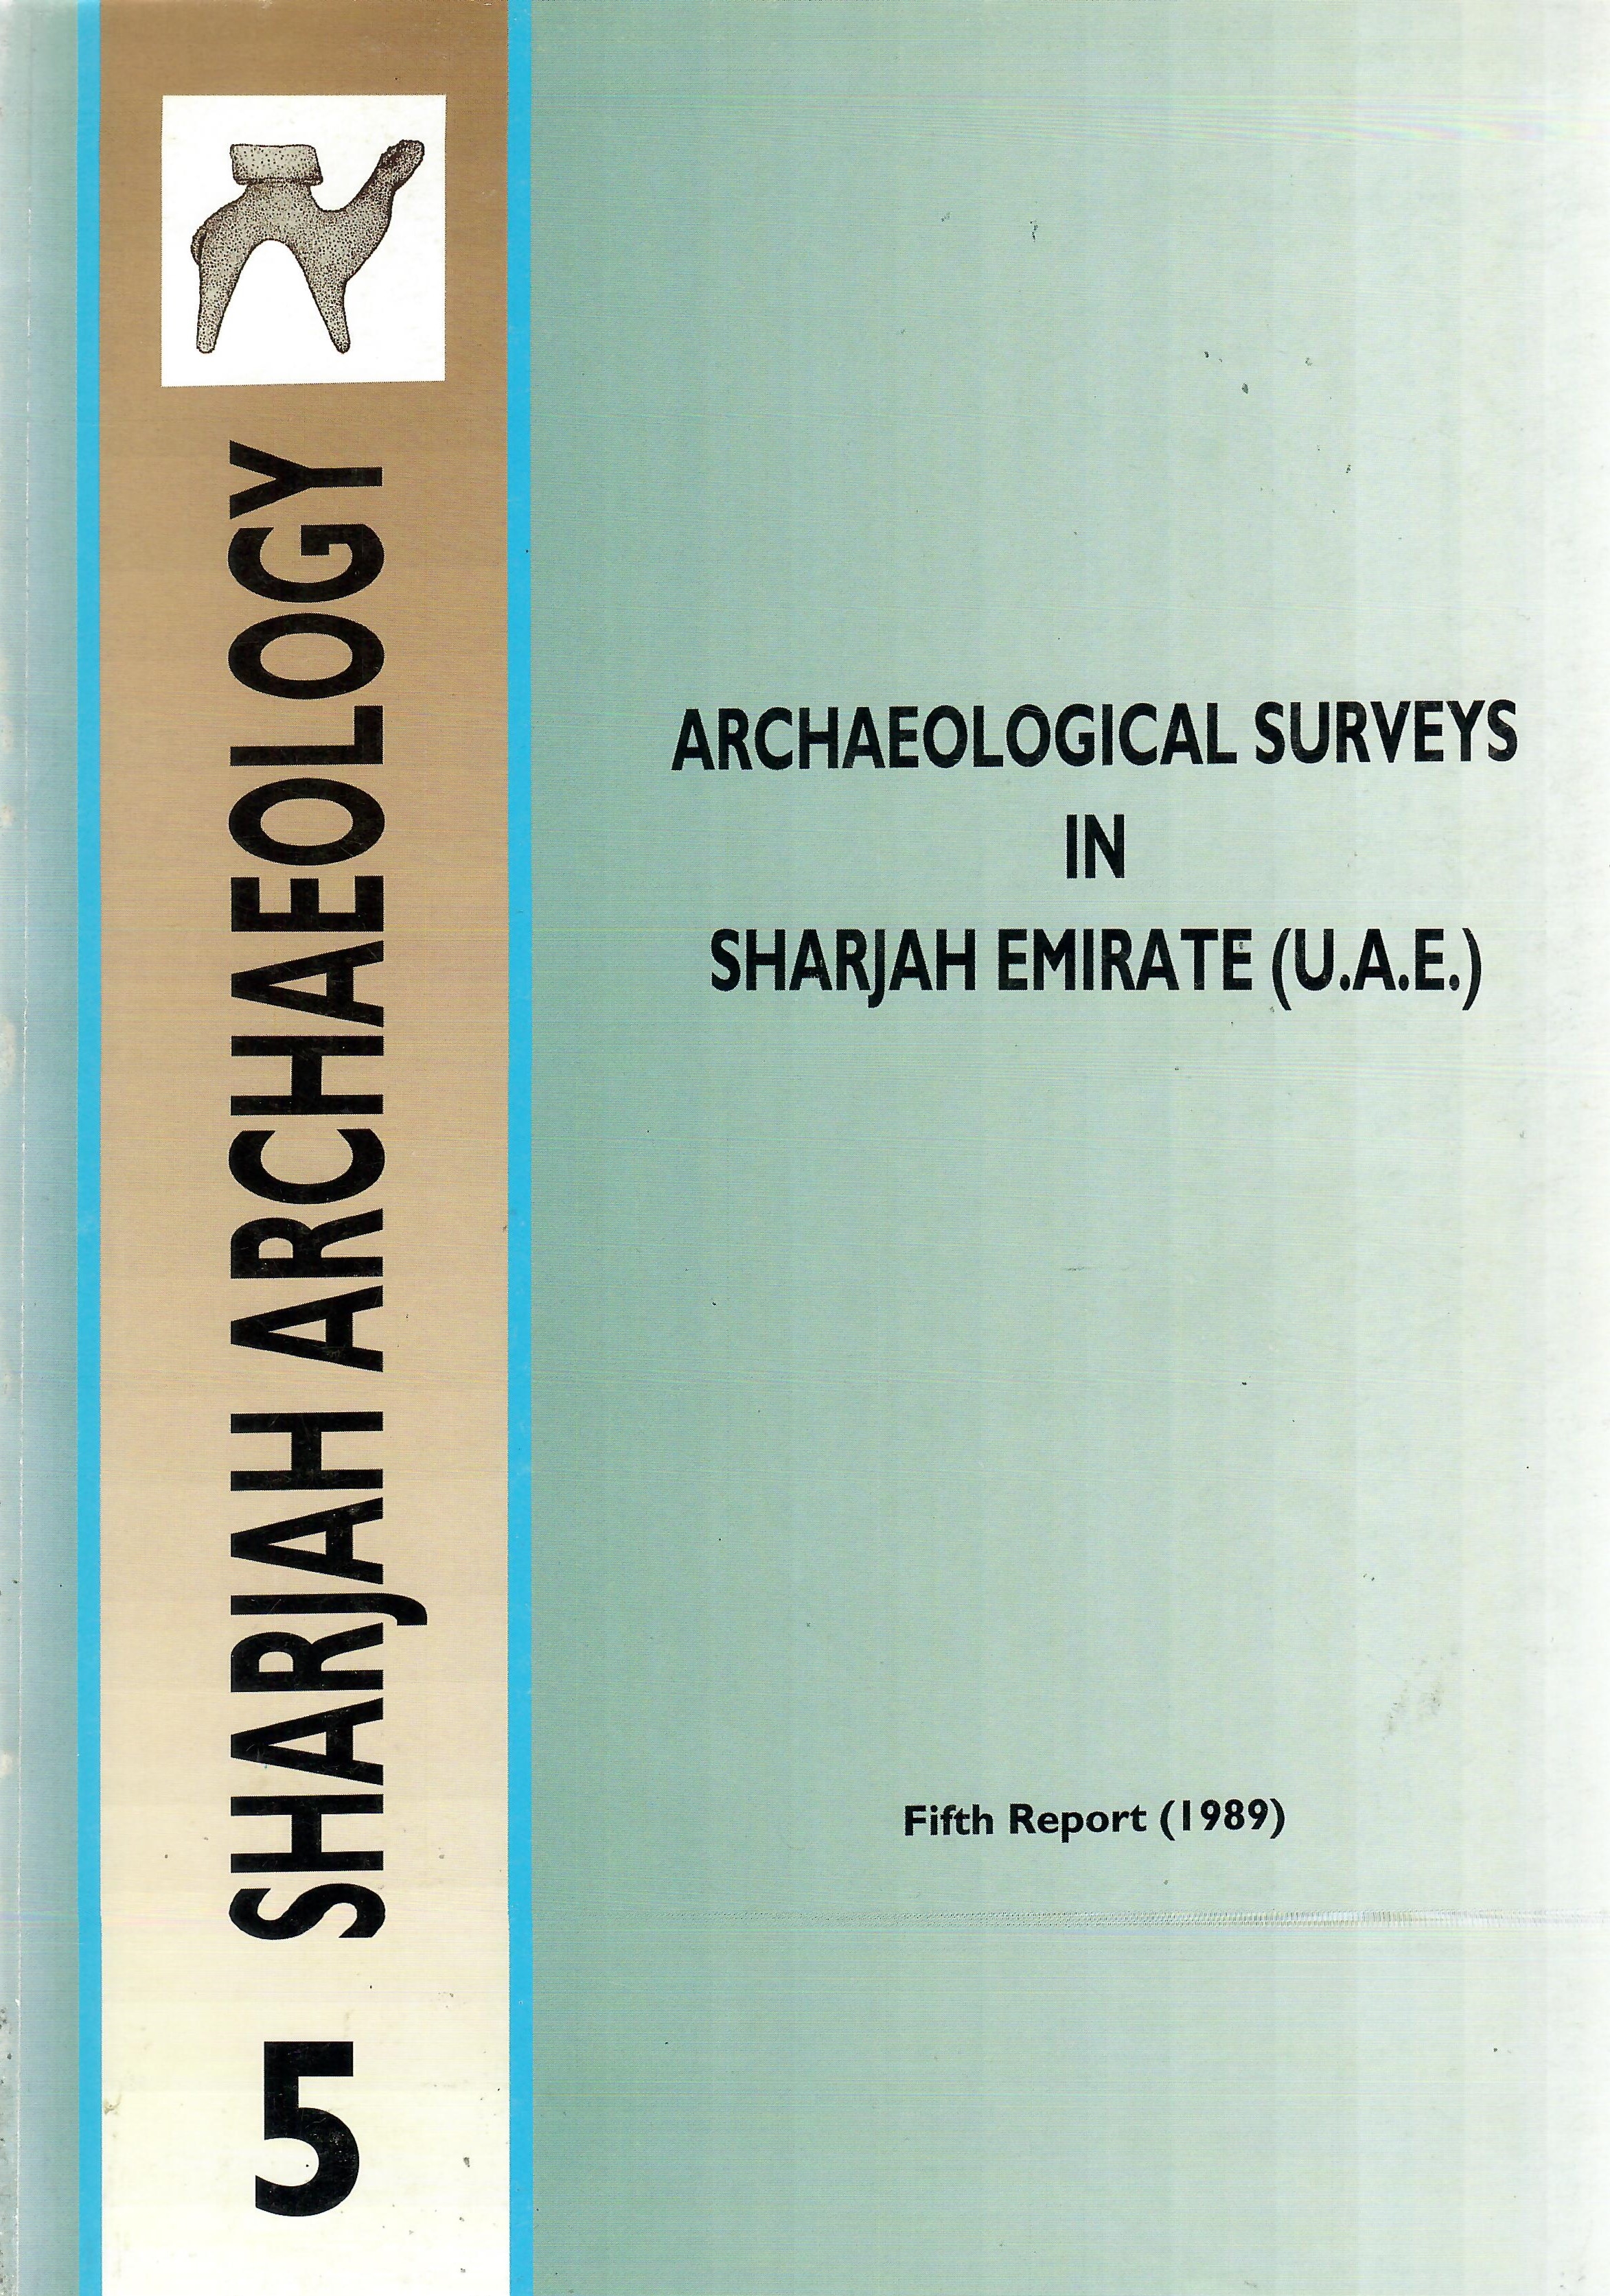 SHARJAH ARCHAEOLOGY FIFTH REPORT 1989